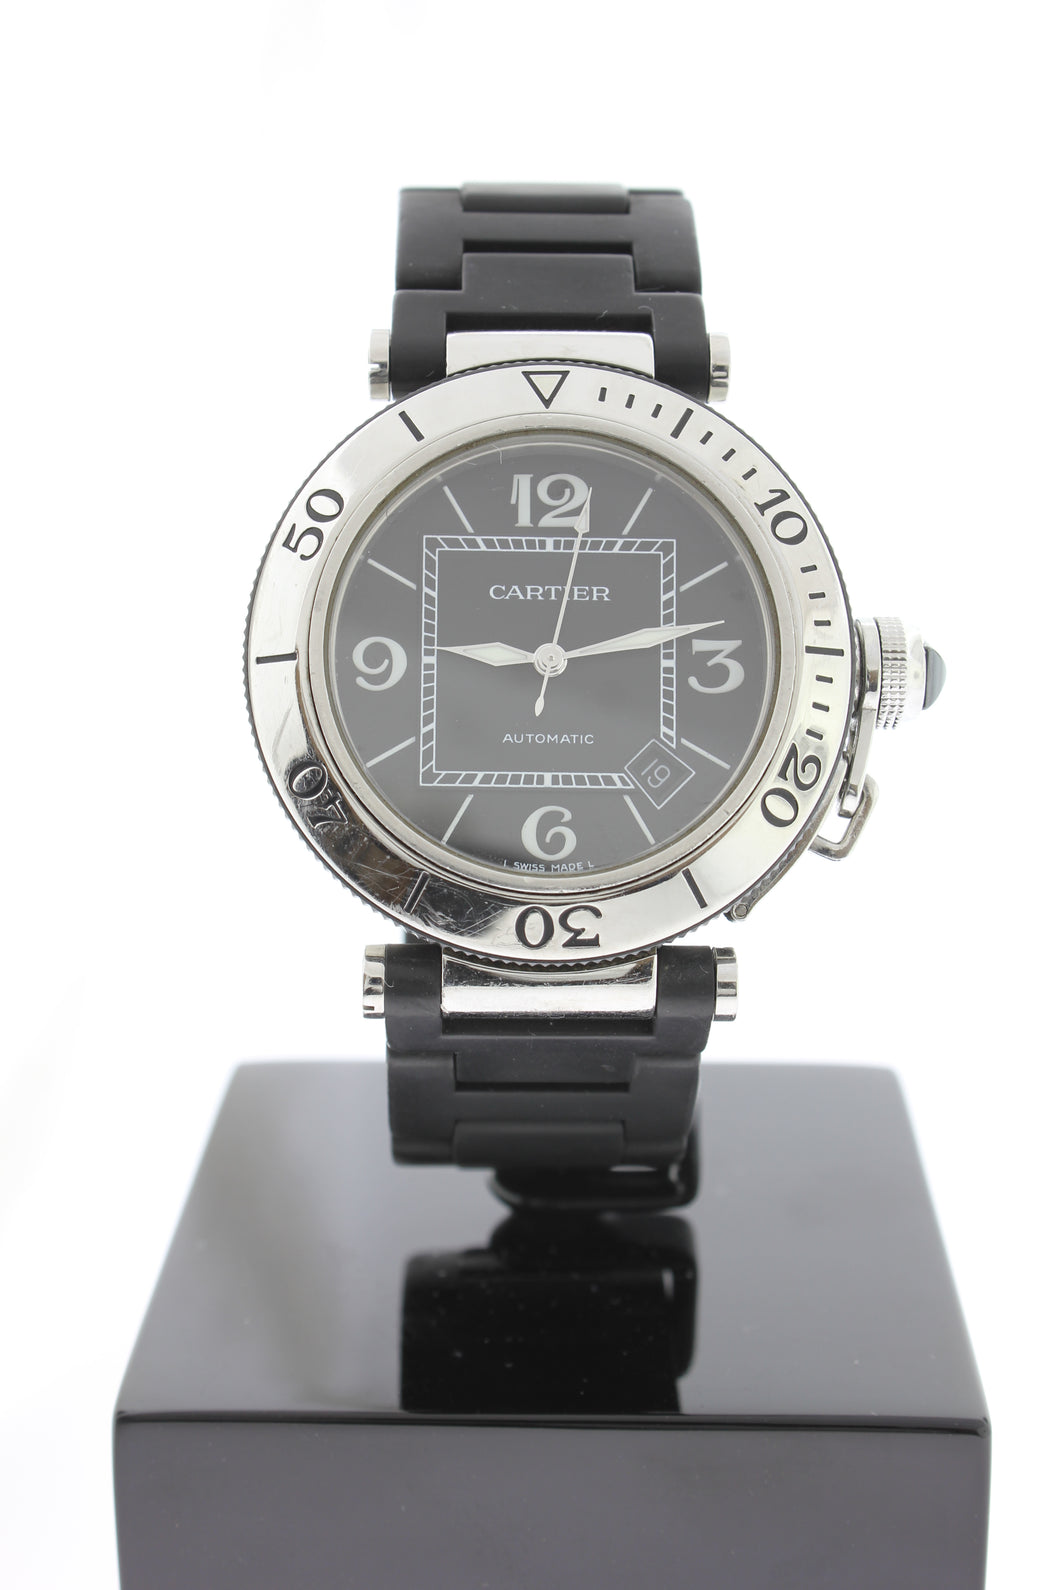 Cartier Pasha Seatimer Automatic Stainless Steel Black Rubber 40mm 2790 - Arnik Jewellers